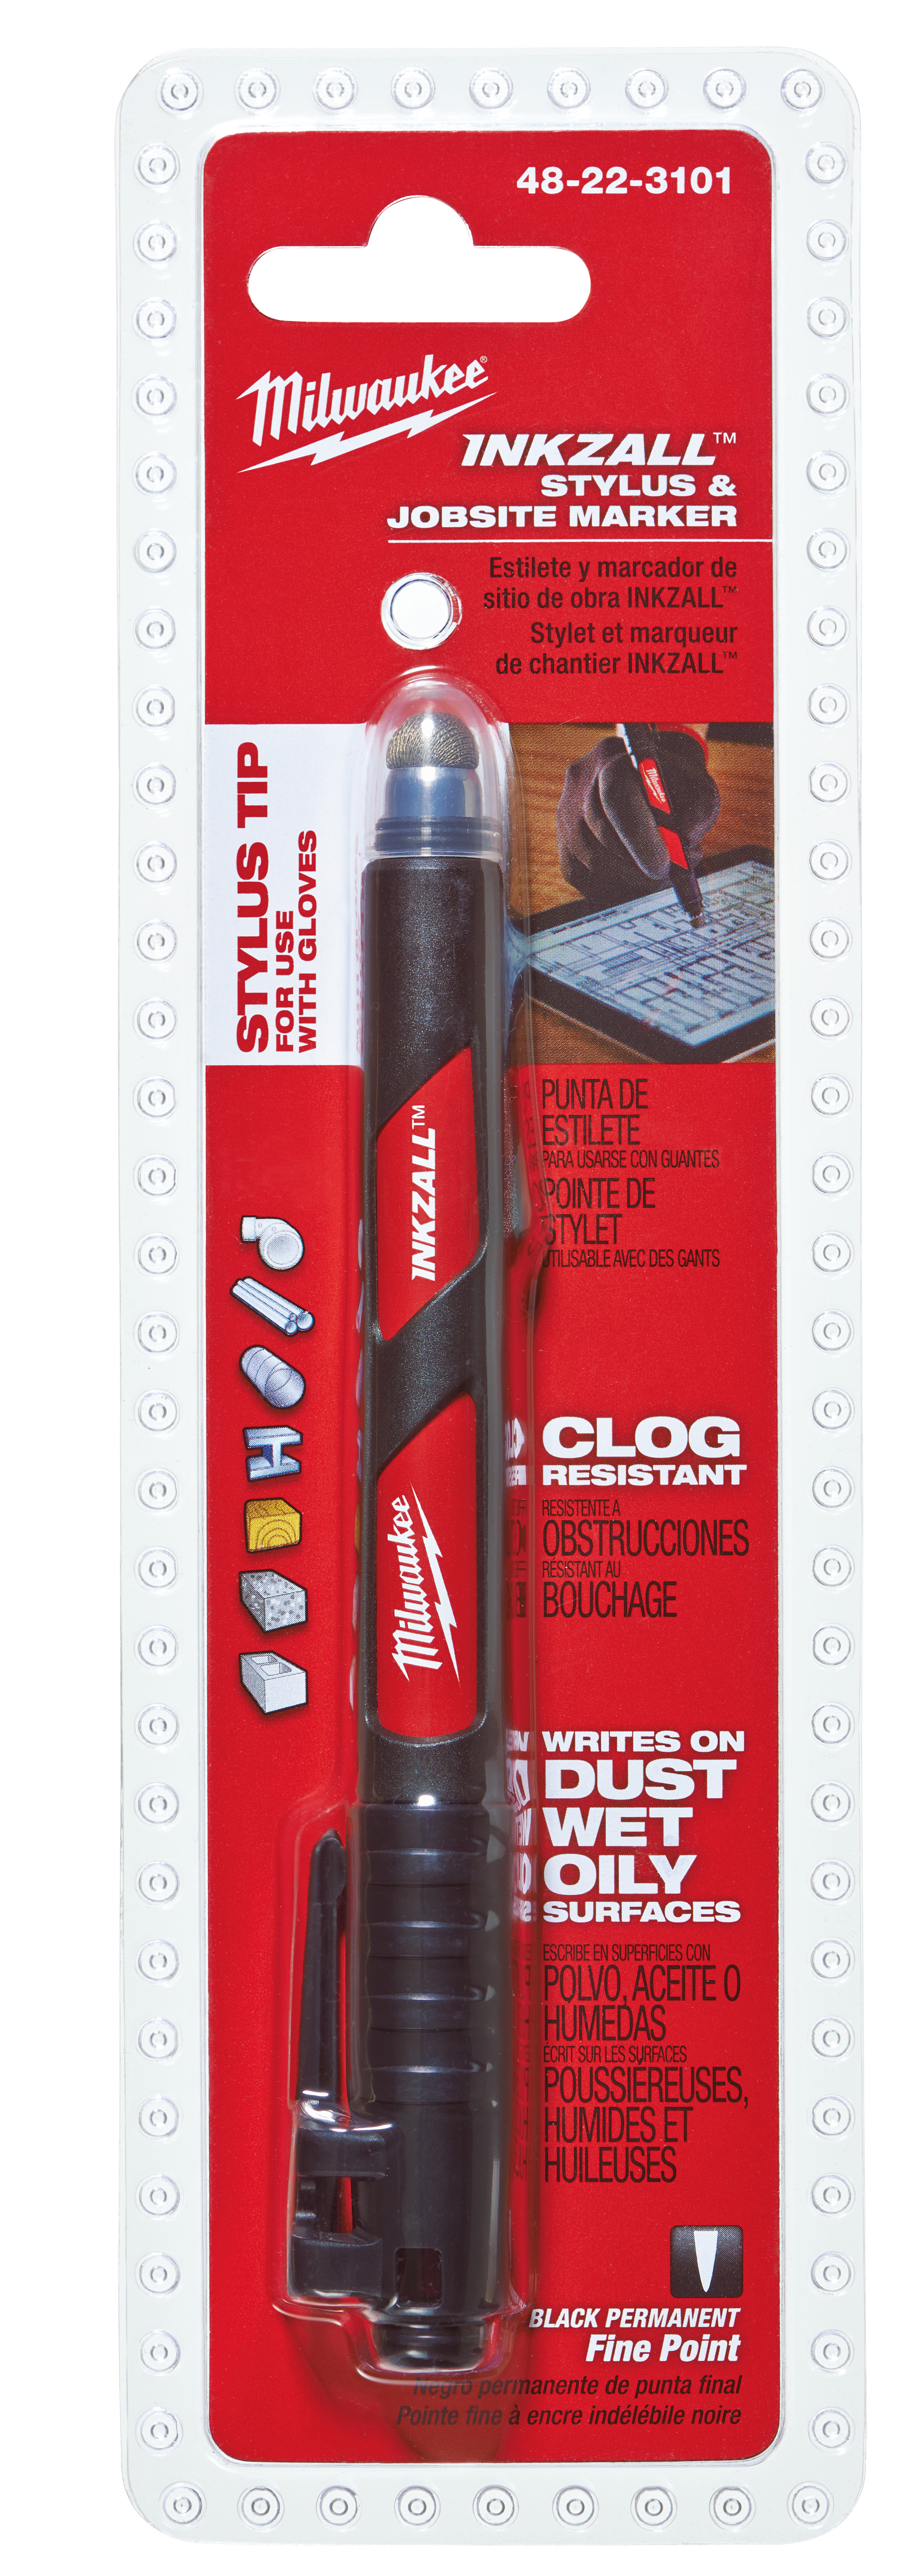 48-22-3101 045242297436 The INKZALL™ jobsite stylus and marker is designed for using touch screen devices like ipms and phones while a user is wearing gloves. It features clog resistant tips and the ability to write through dusty, wet or oily surfaces. The durable marker tips are designed for writing on rough surfaces such as OSB, cinder block and concrete and the ink dries quickly to reduce smearing markings, without drying out quickly when the cap is left off. For added user convenience, the INKZALL™ markers have a built-in hard hat clip for easy storage and access. INKZALL™ markers confirm to Milwaukee's commitment to best-in-class durability and their relentless mission to provide innovative solutions to the end user.